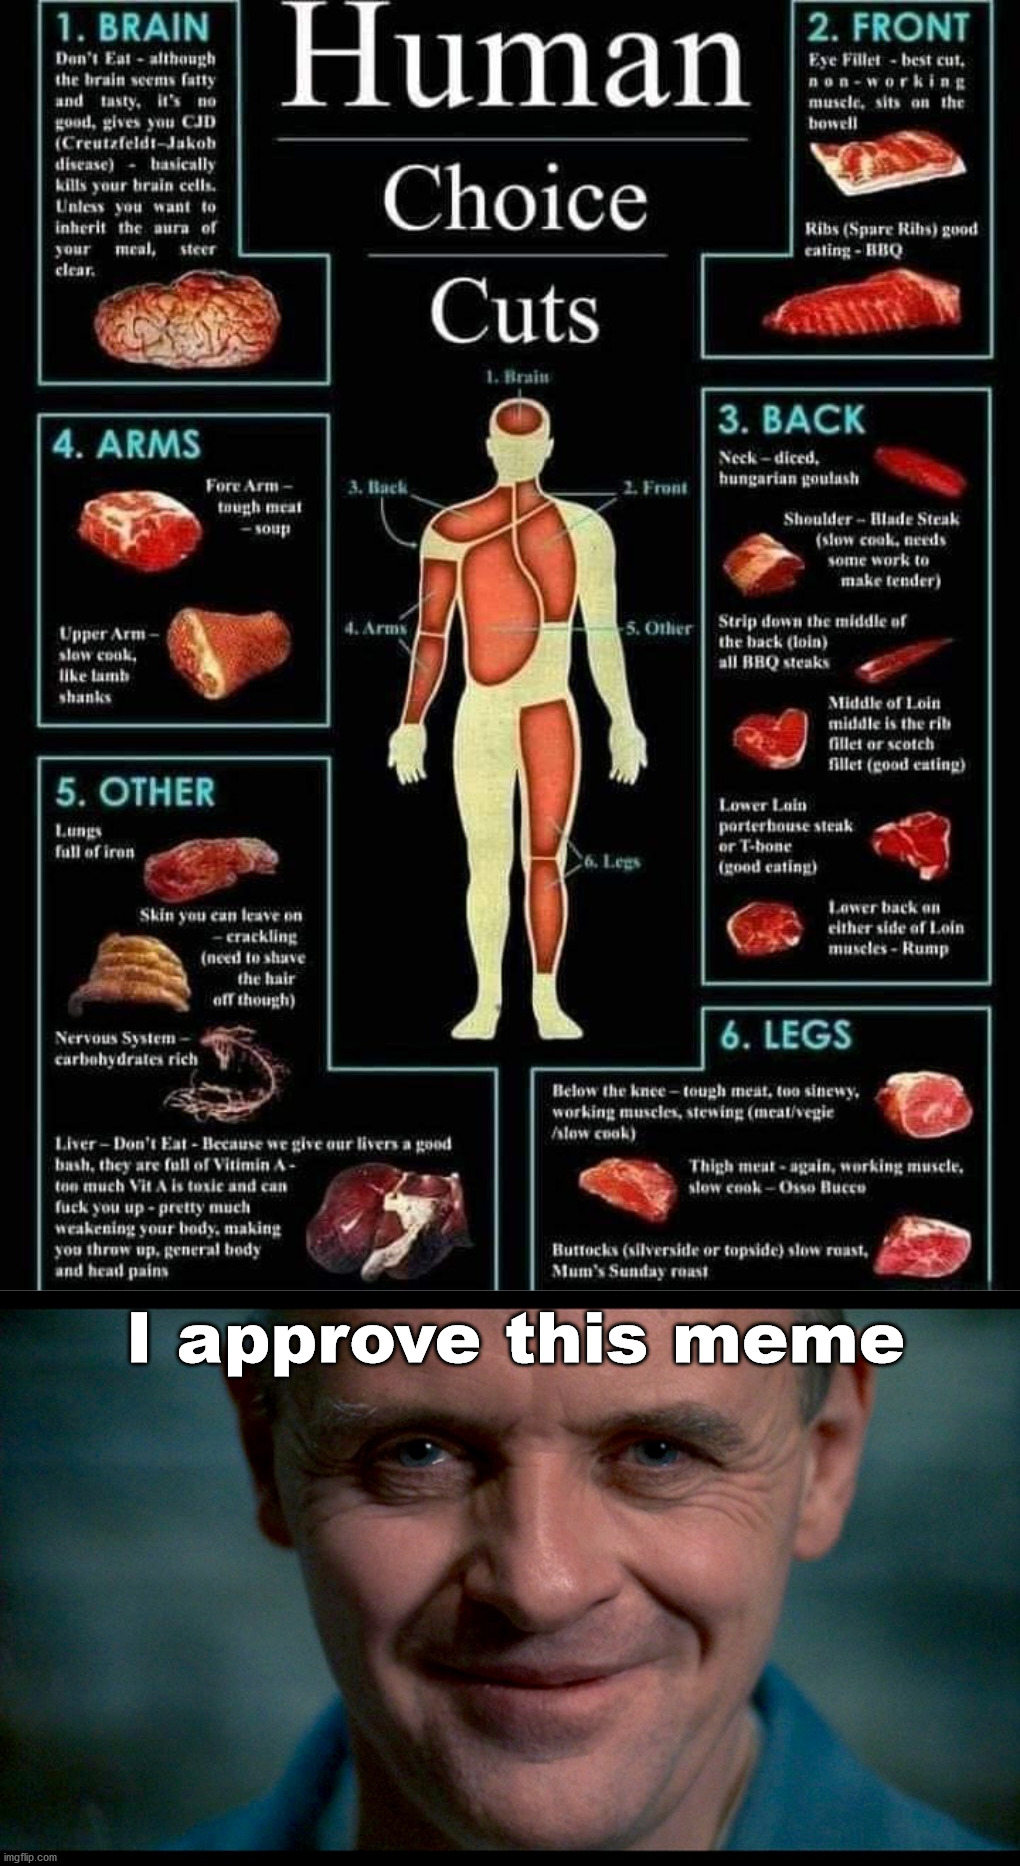 I approve this meme | image tagged in hannibal,dark humor | made w/ Imgflip meme maker